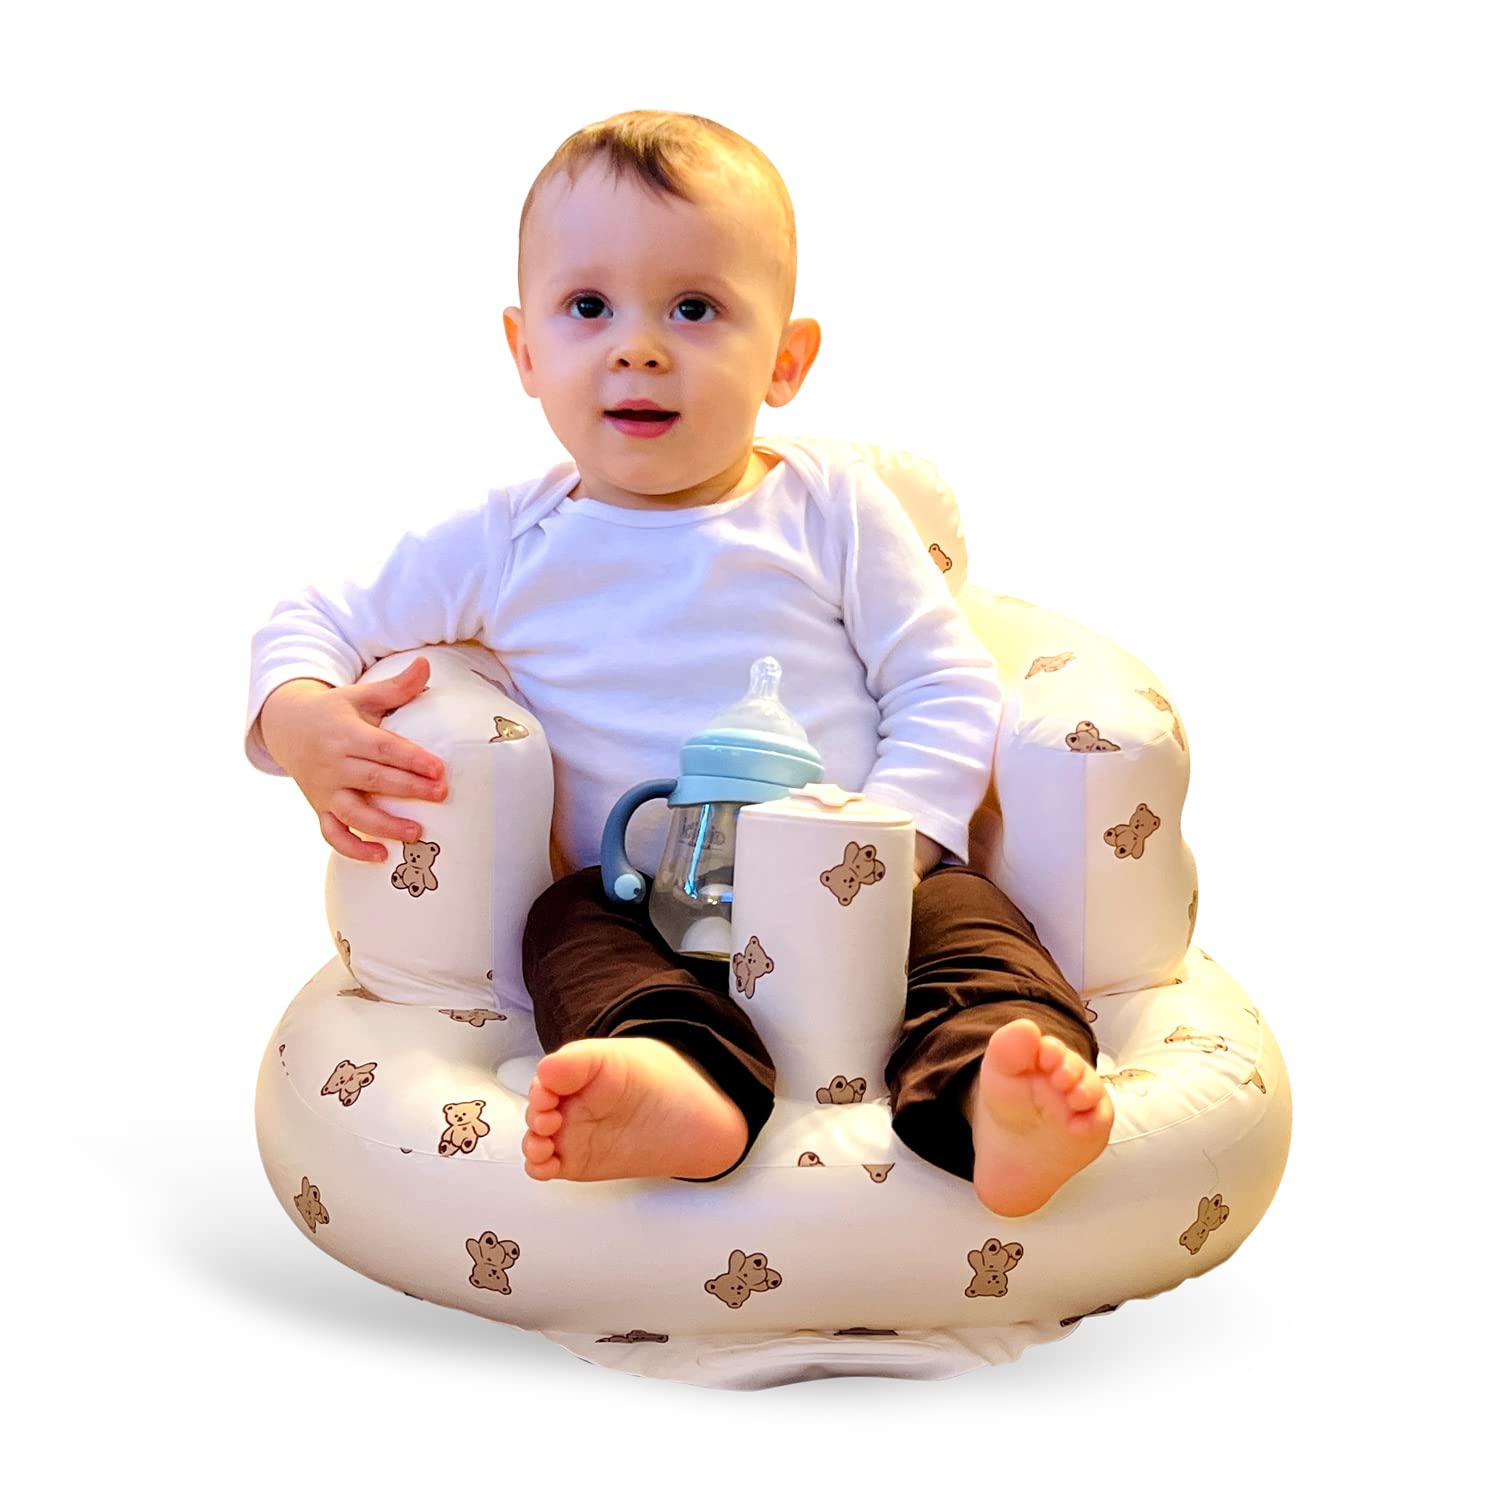 Baby Inflatable Seat for Babies 3-36 Months, Built in Air Pump Infant Back Support Sofa Toddler Chair for Sitting Up, Baby Shower Chair Floor Seater Gifts (Bear Cub)